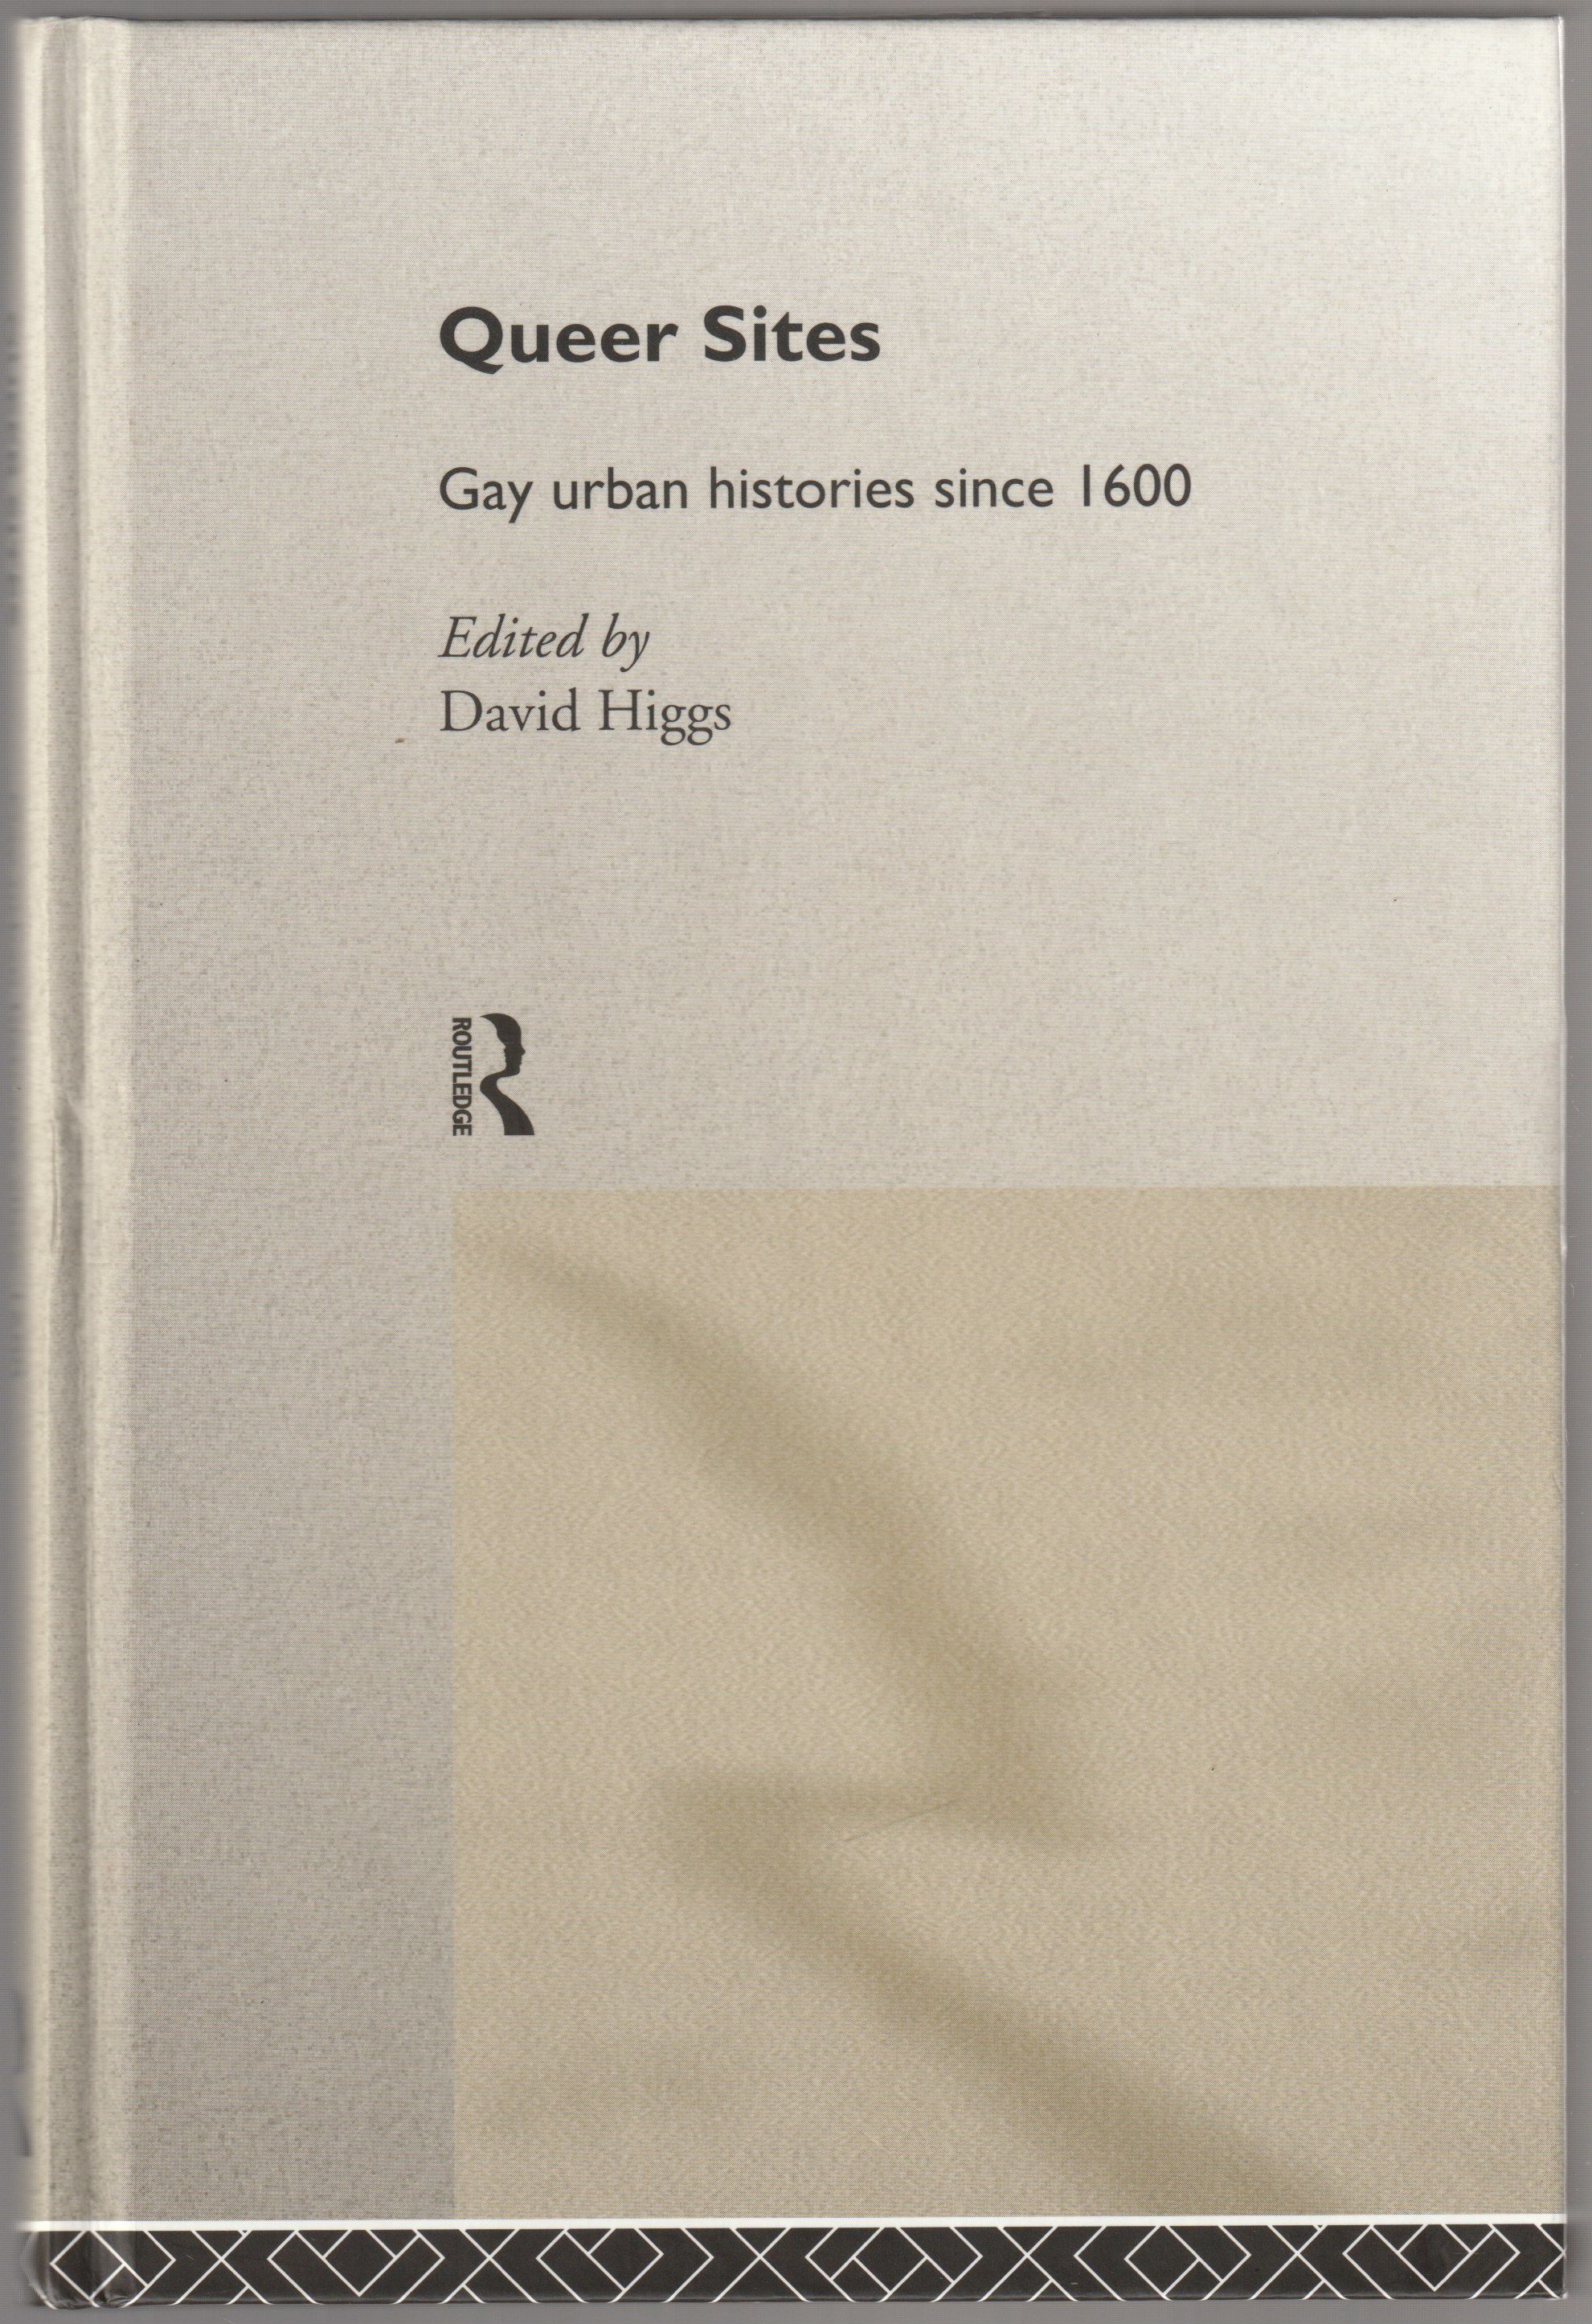 Queer sites : gay urban histories since 1600.